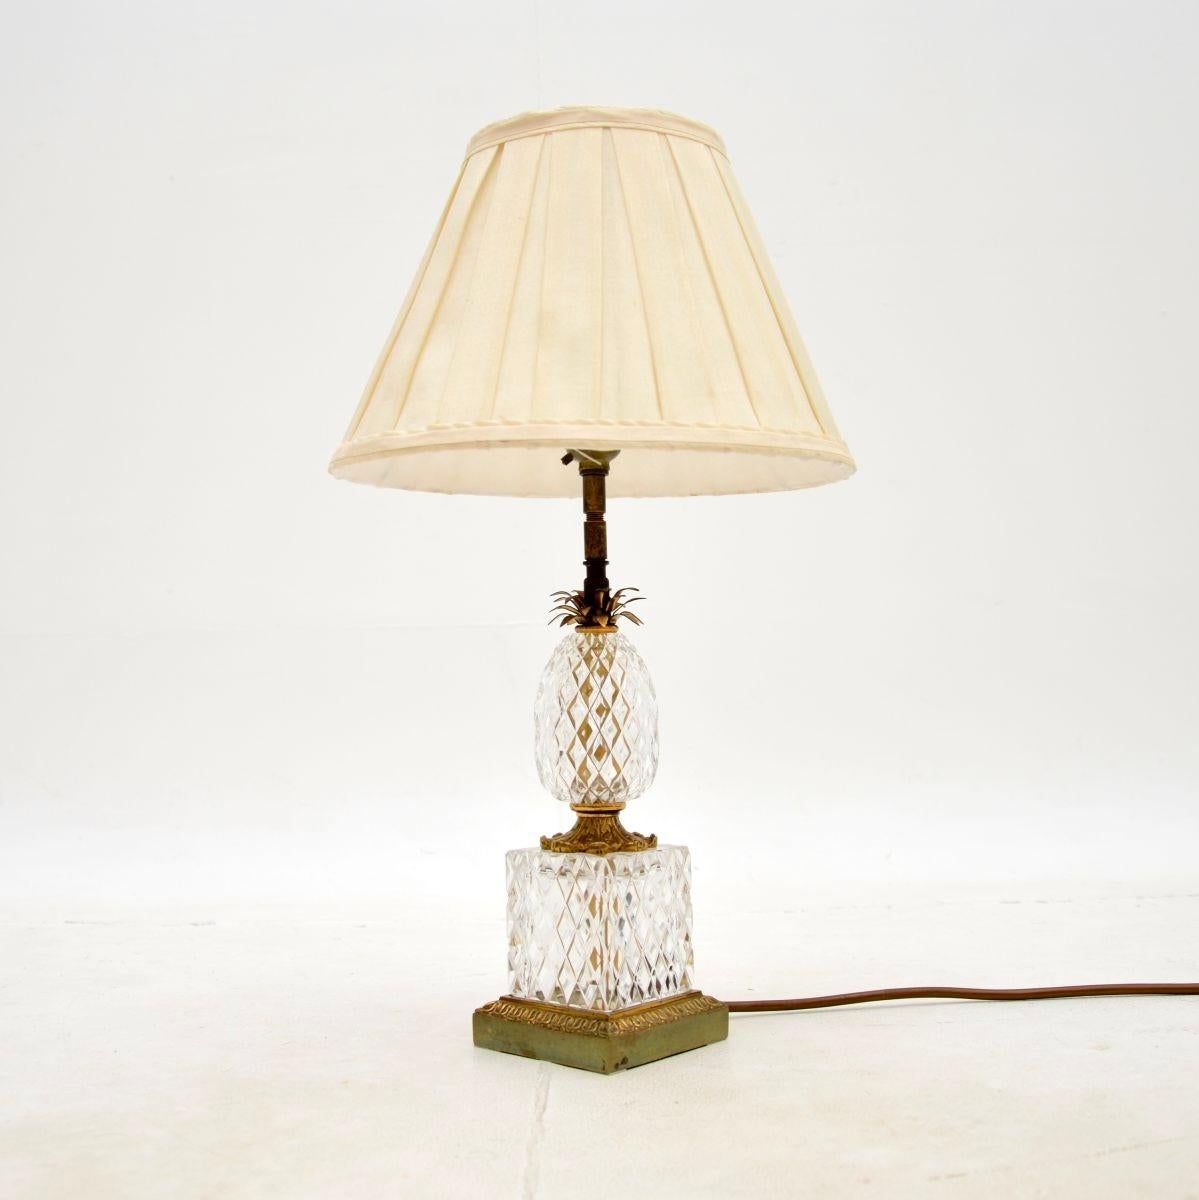 A stunning antique French crystal glass and brass table lamp. This was made in Paris and dates from around the 1950’s.

It is of superb quality, the label beneath the lamp says ‘Crystal Bronze Paris’, so though the metal looks like brass to us, it